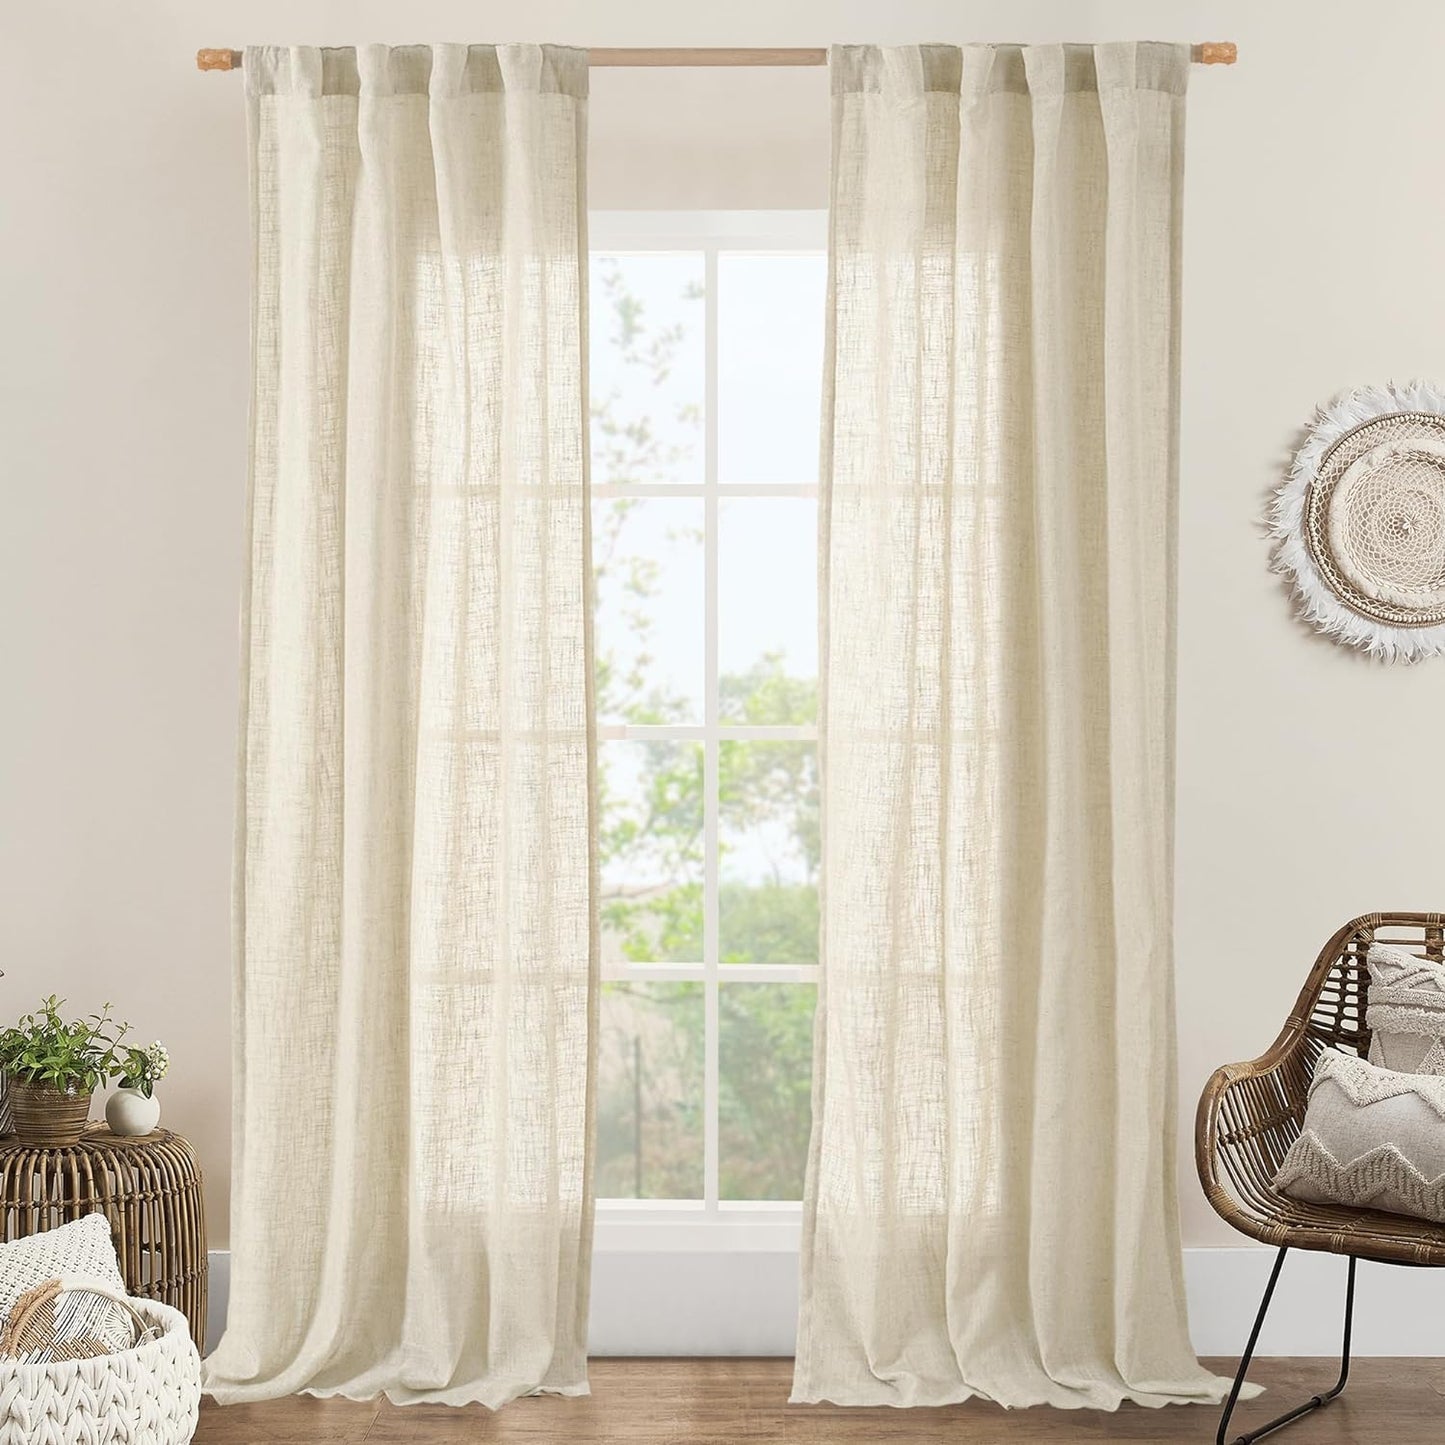 LAMIT Natural Linen Blended Curtains for Living Room, Back Tab and Rod Pocket Semi Sheer Curtains Light Filtering Country Rustic Drapes for Bedroom/Farmhouse, 2 Panels,52 X 108 Inch, Linen  LAMIT Beige 38W X 84L 